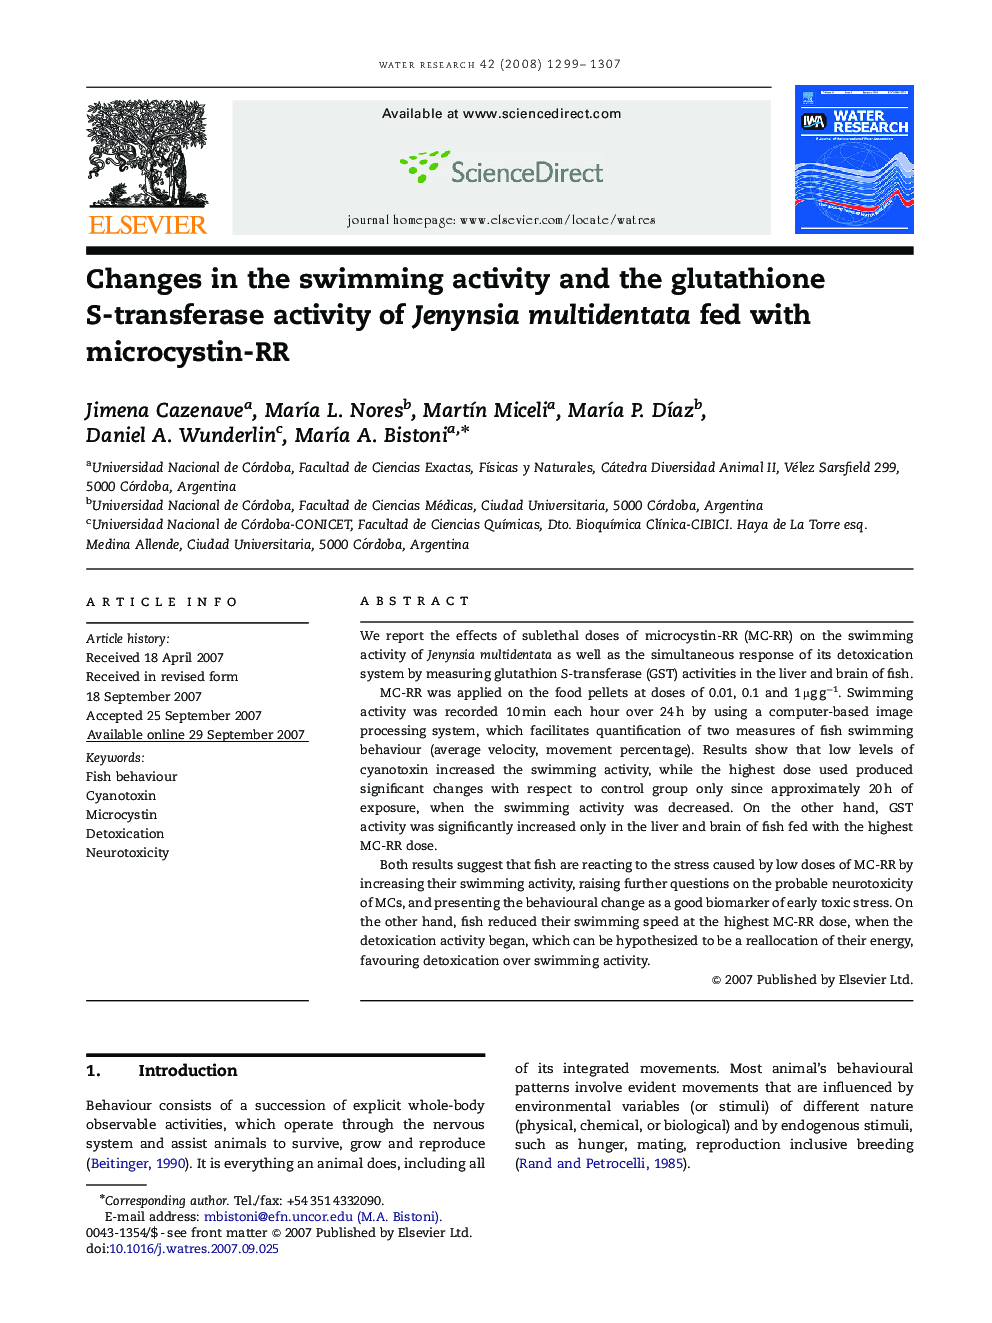 Changes in the swimming activity and the glutathione S-transferase activity of Jenynsia multidentata fed with microcystin-RR